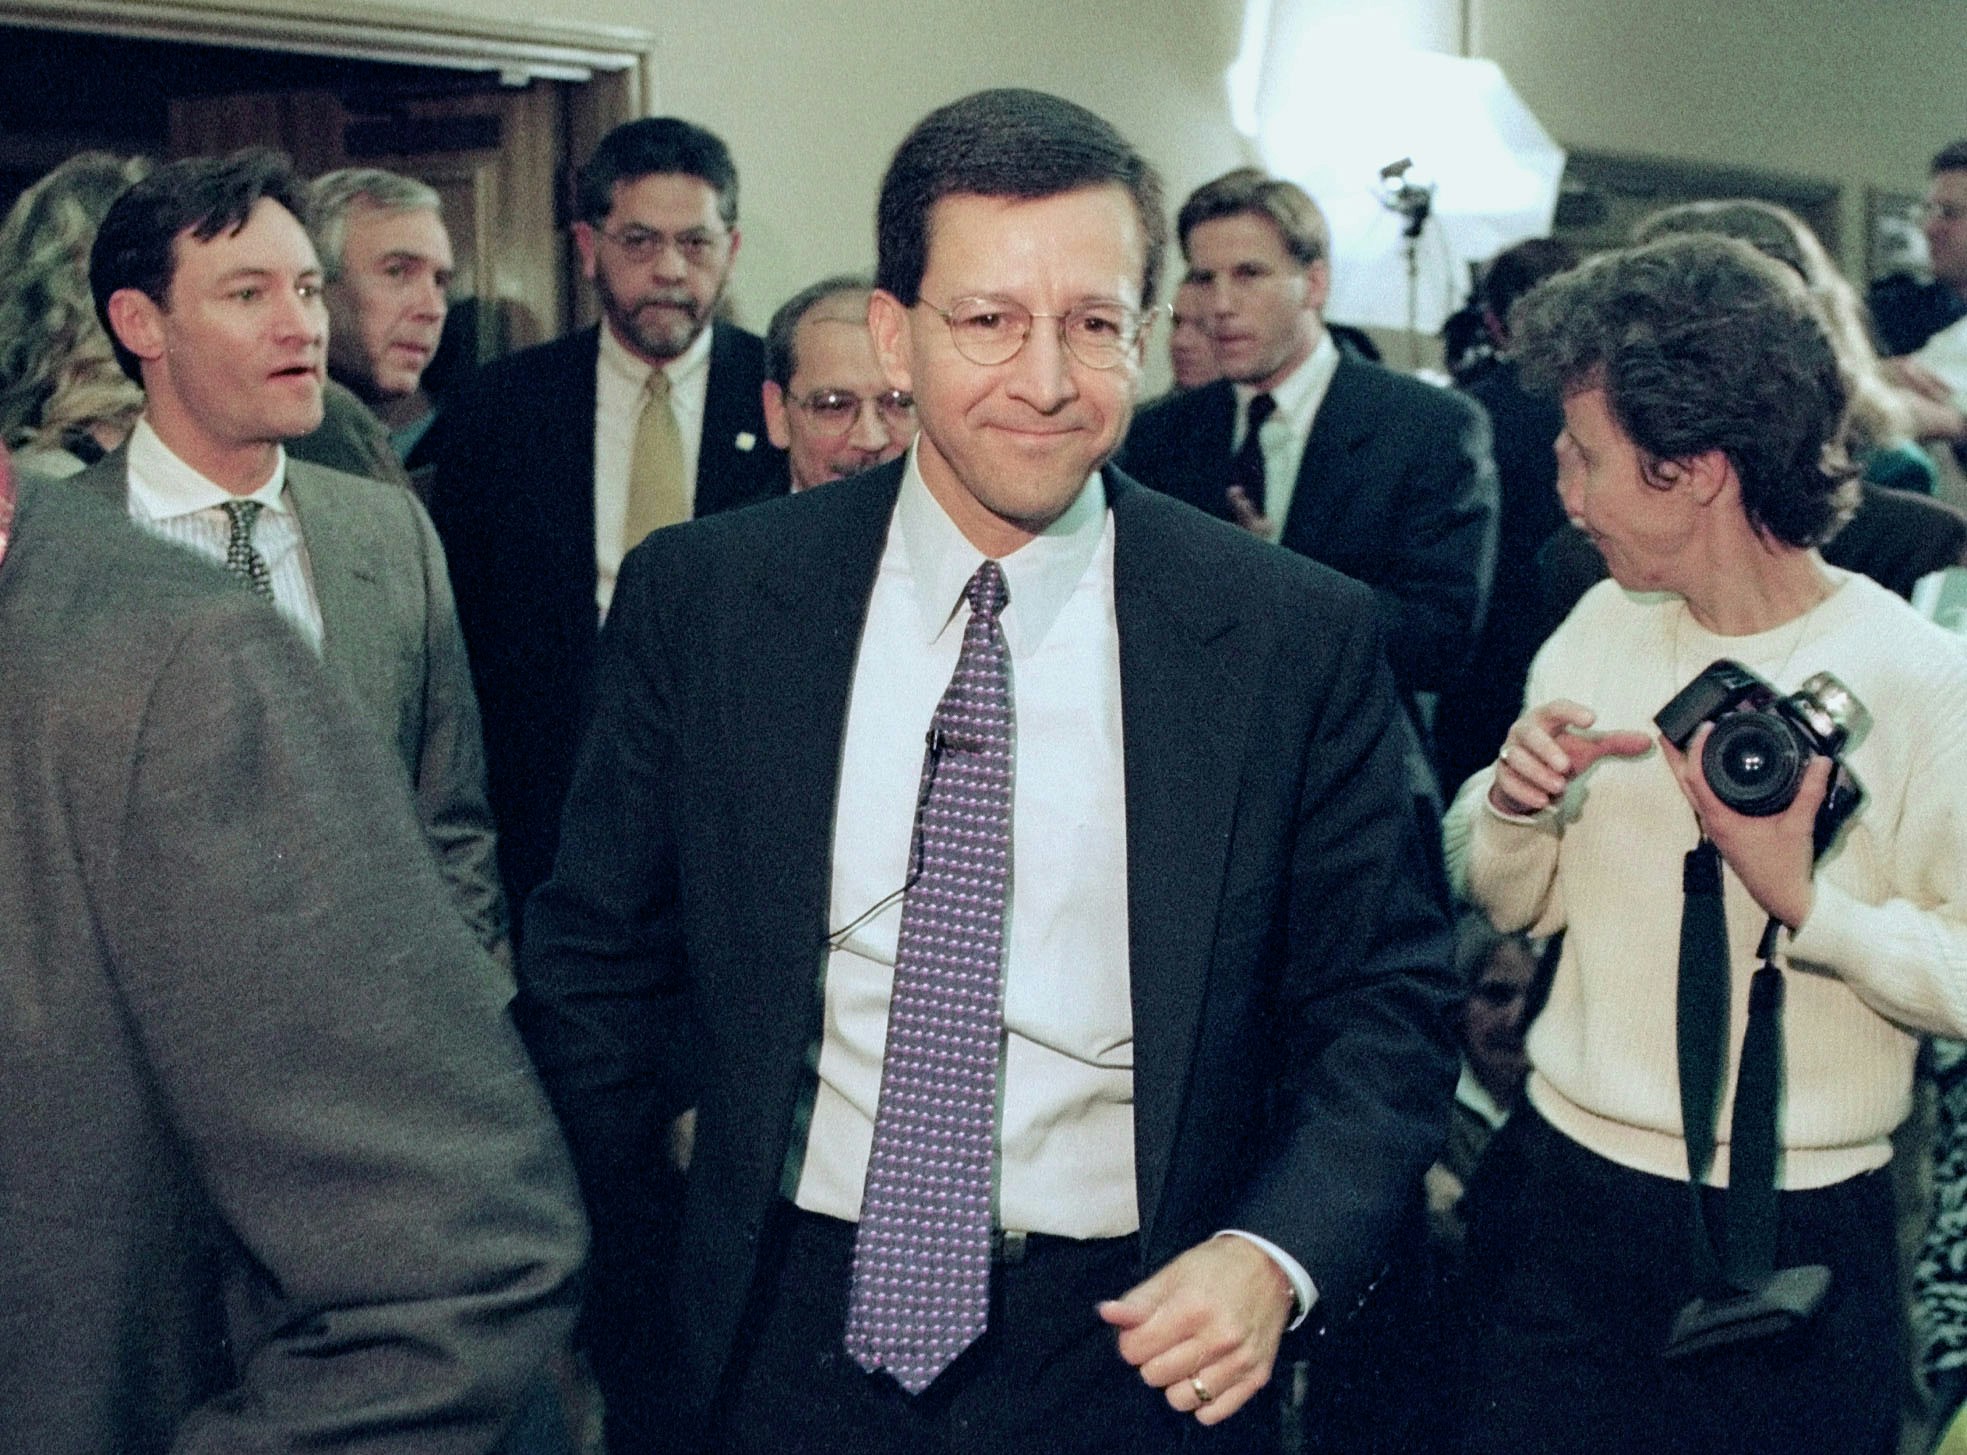 ** FILE ** Dan Morales, center, then Texas Attorney General, shown in this file photo from Jan. 16, 1998, moves through a crowd before his news conference to announce the award of $15.32 billion to the state from the tobacco industry. Former Texas Attorney General Dan Morales and a onetime law associate were indicted Thursday, March 6, 2003, on federal charges of trying to fraudulently obtain hundreds of millions of dollars in attorney fees from a state settlement with tobacco companies.  Both Morales and Marc Murr, a former associate and personal friend, were expected to turn themselves in Friday, authorities said. (AP Photo/Harry Cabluck, File)